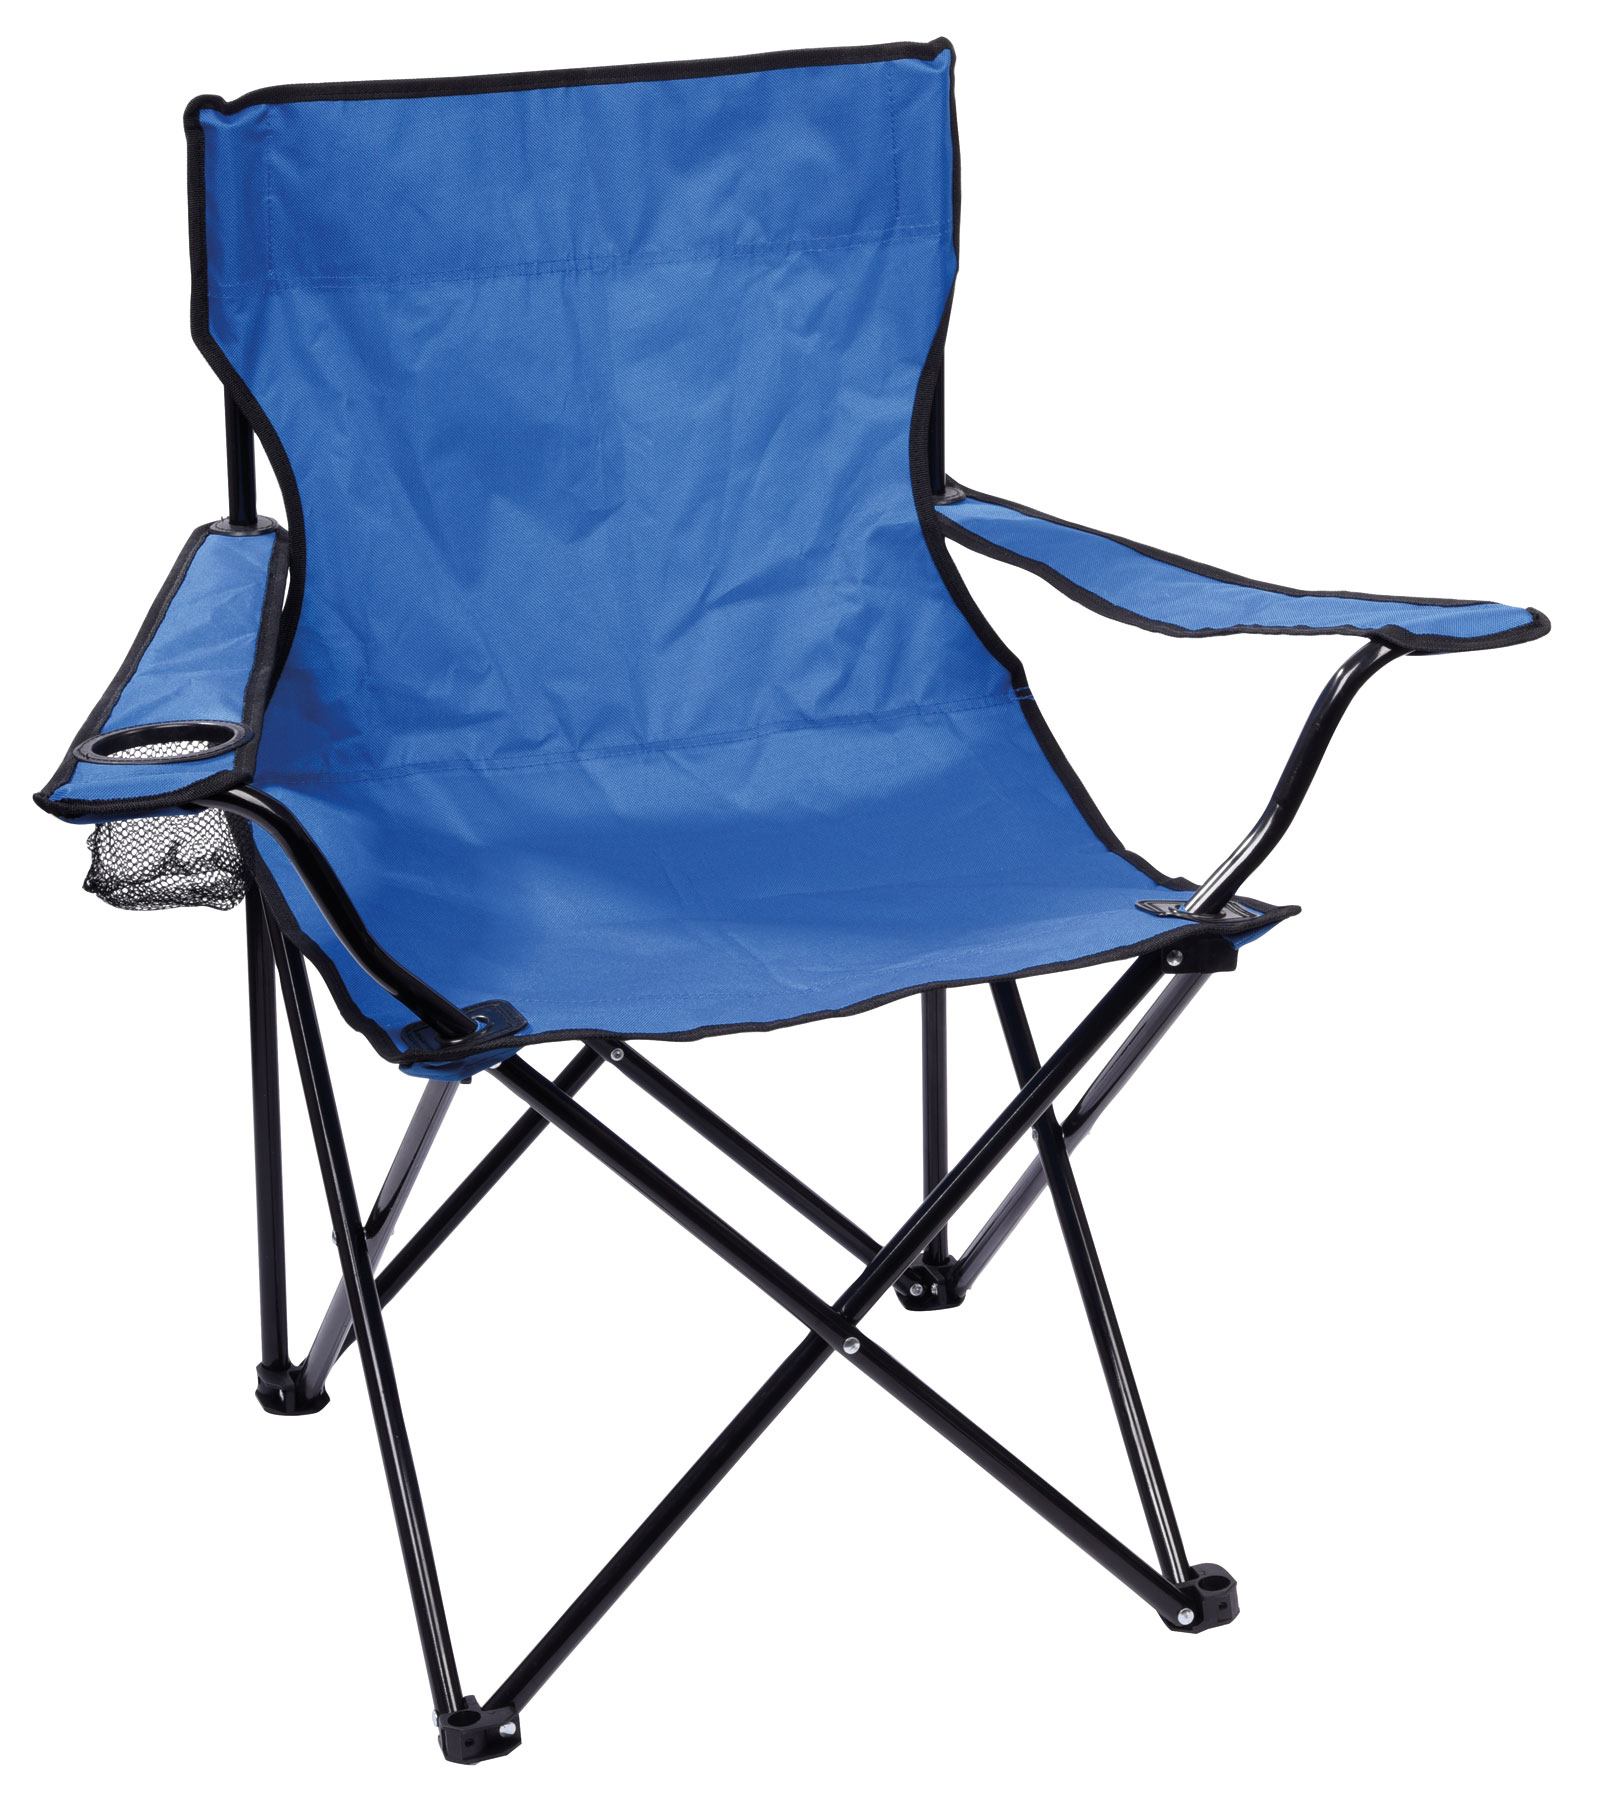 Beach and camping chair SUNNY DAY - blue